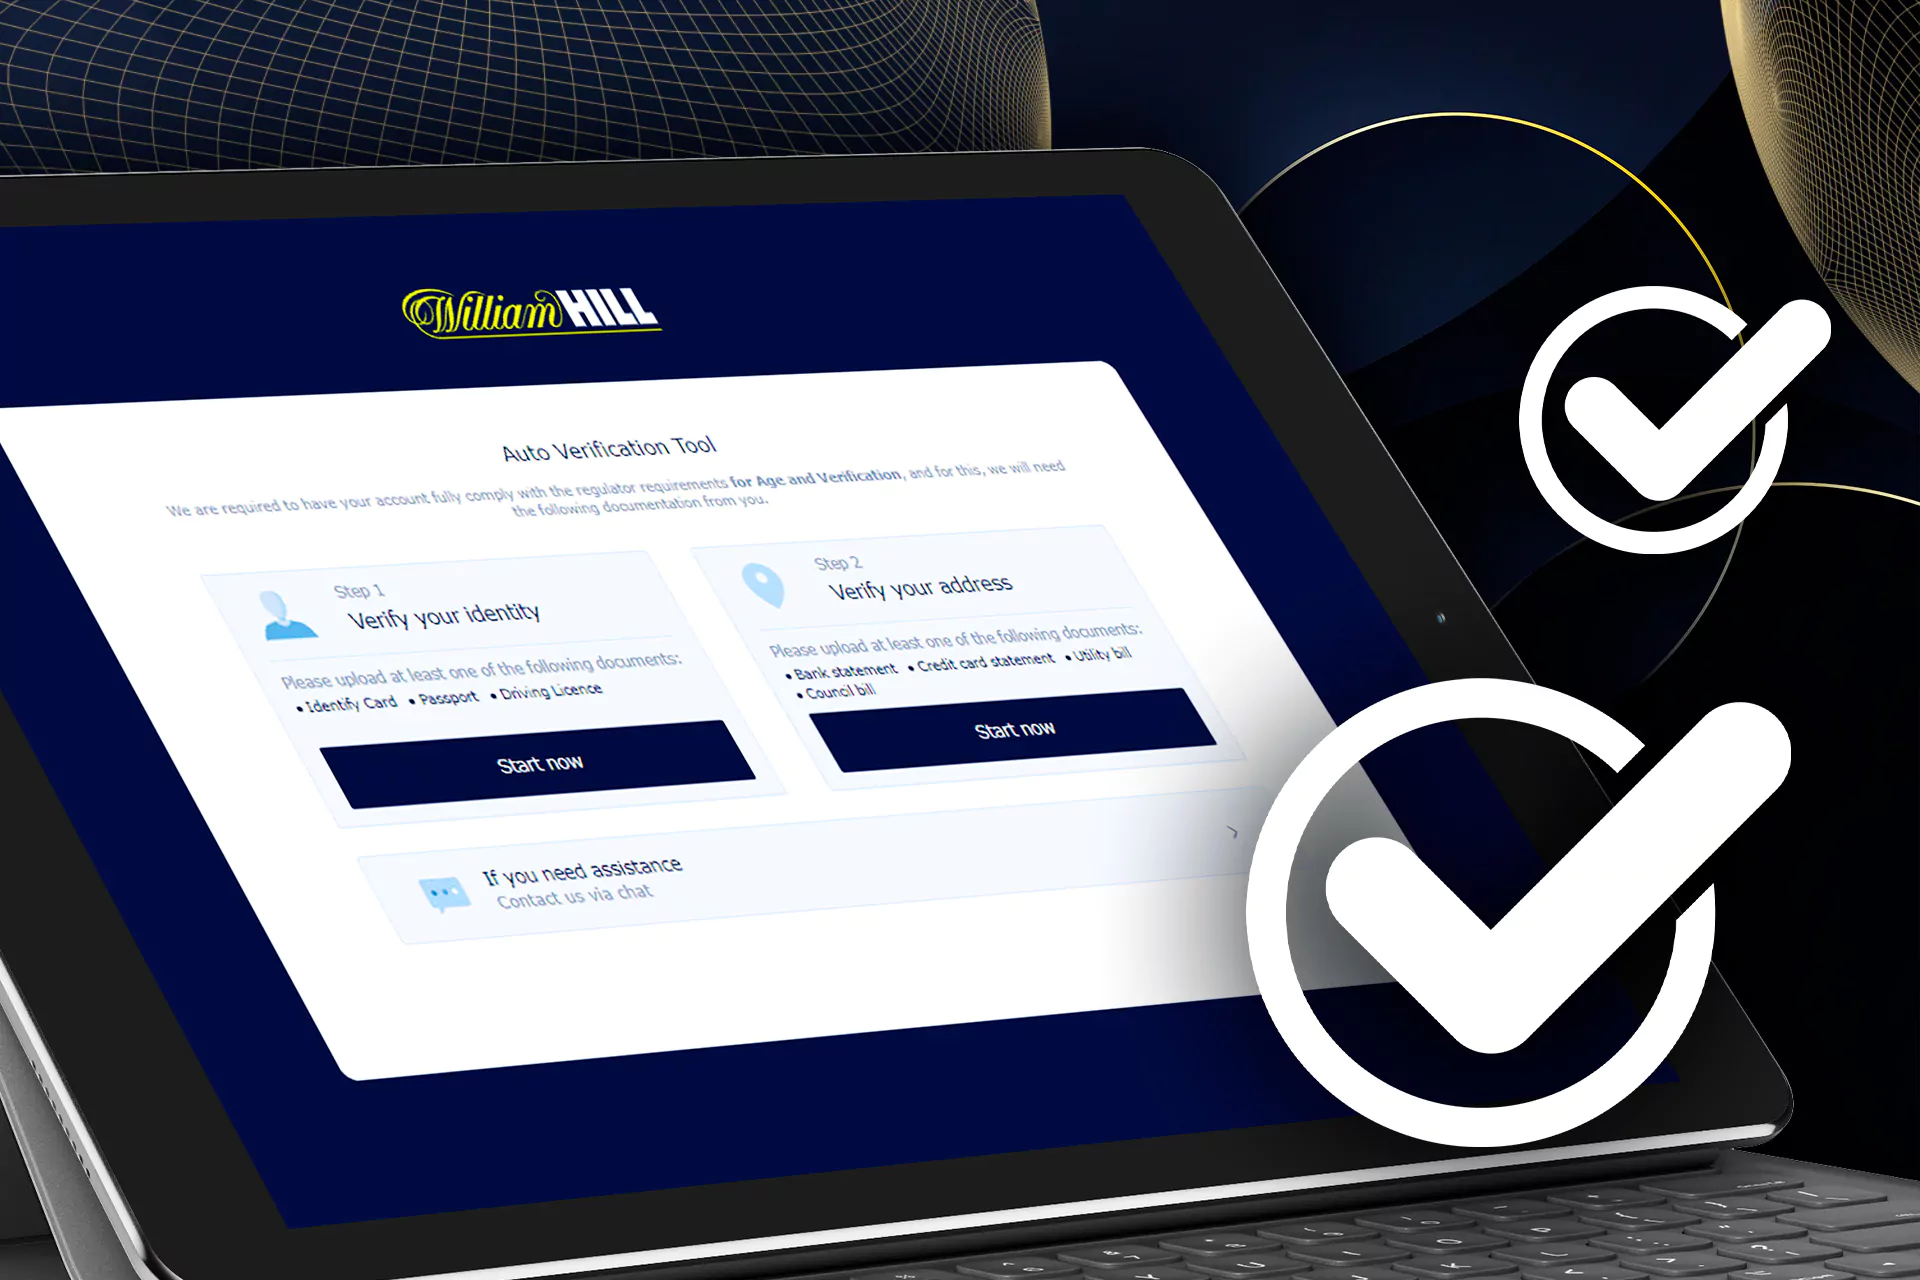 Verify your William Hill account to withfraw winnings later.